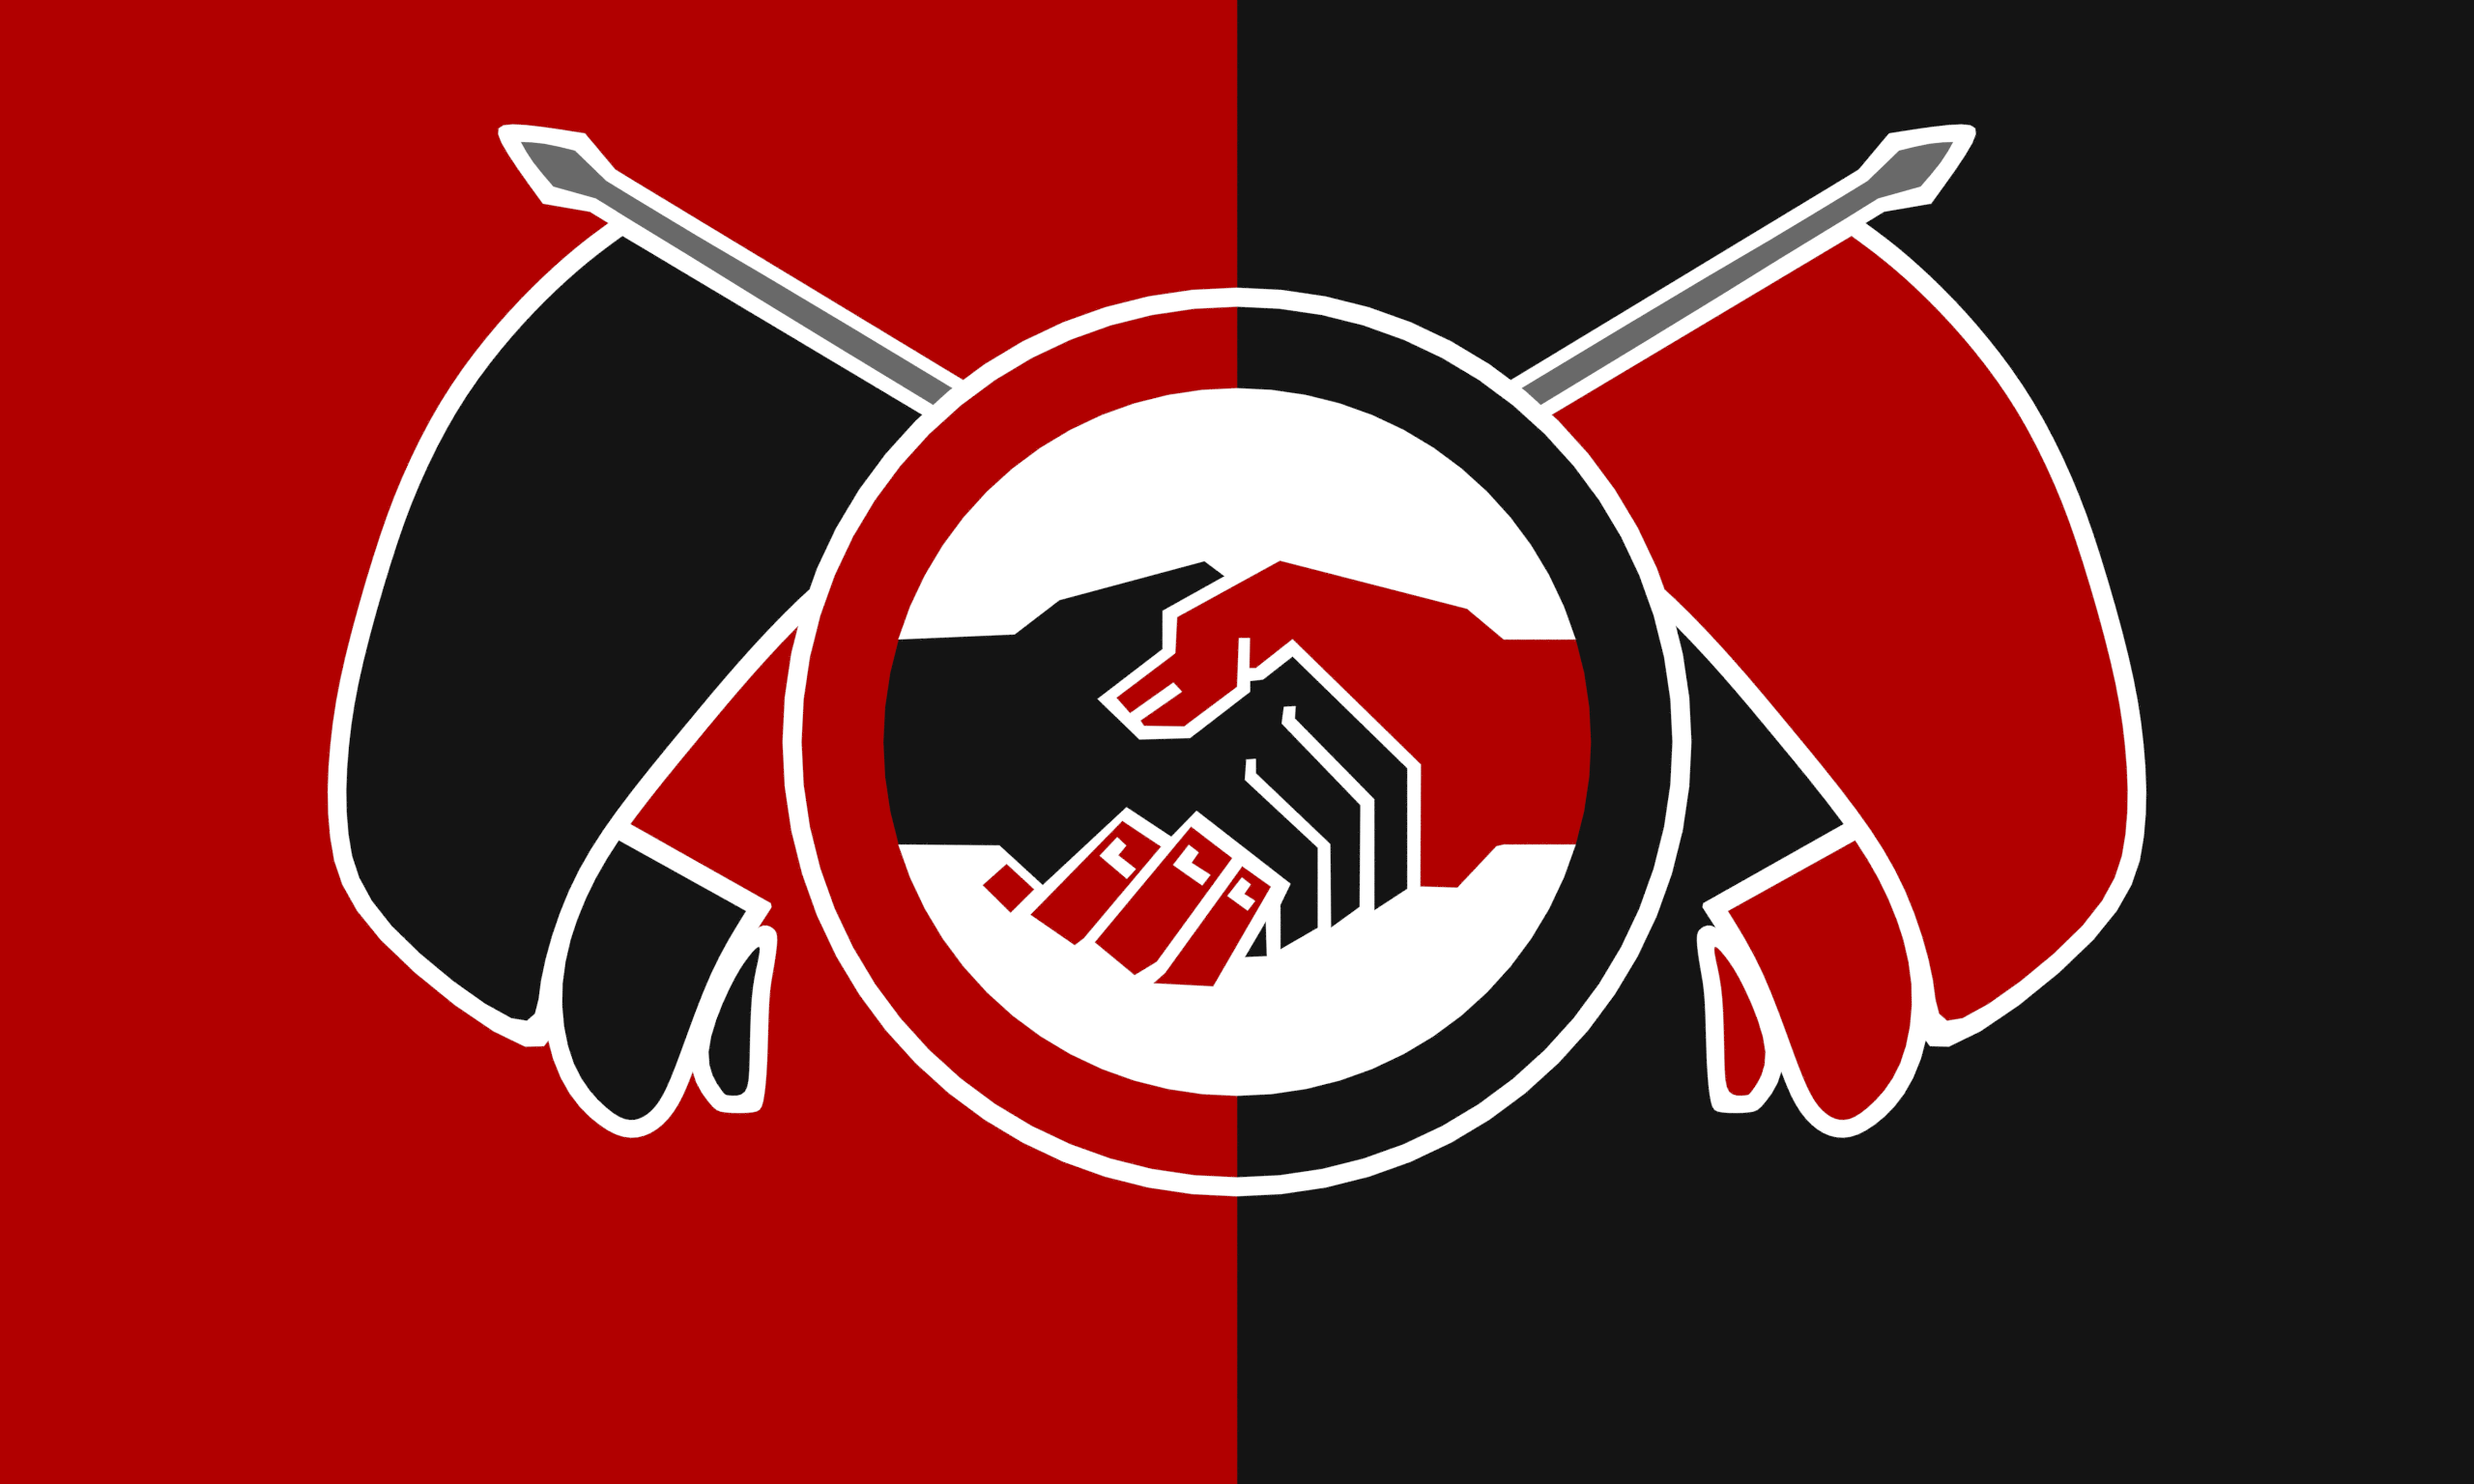 https://static.wikia.nocookie.net/politicsandwar/images/f/ff/The_Revolutionary_Front_Flag.png/revision/latest?cb=20180419143205